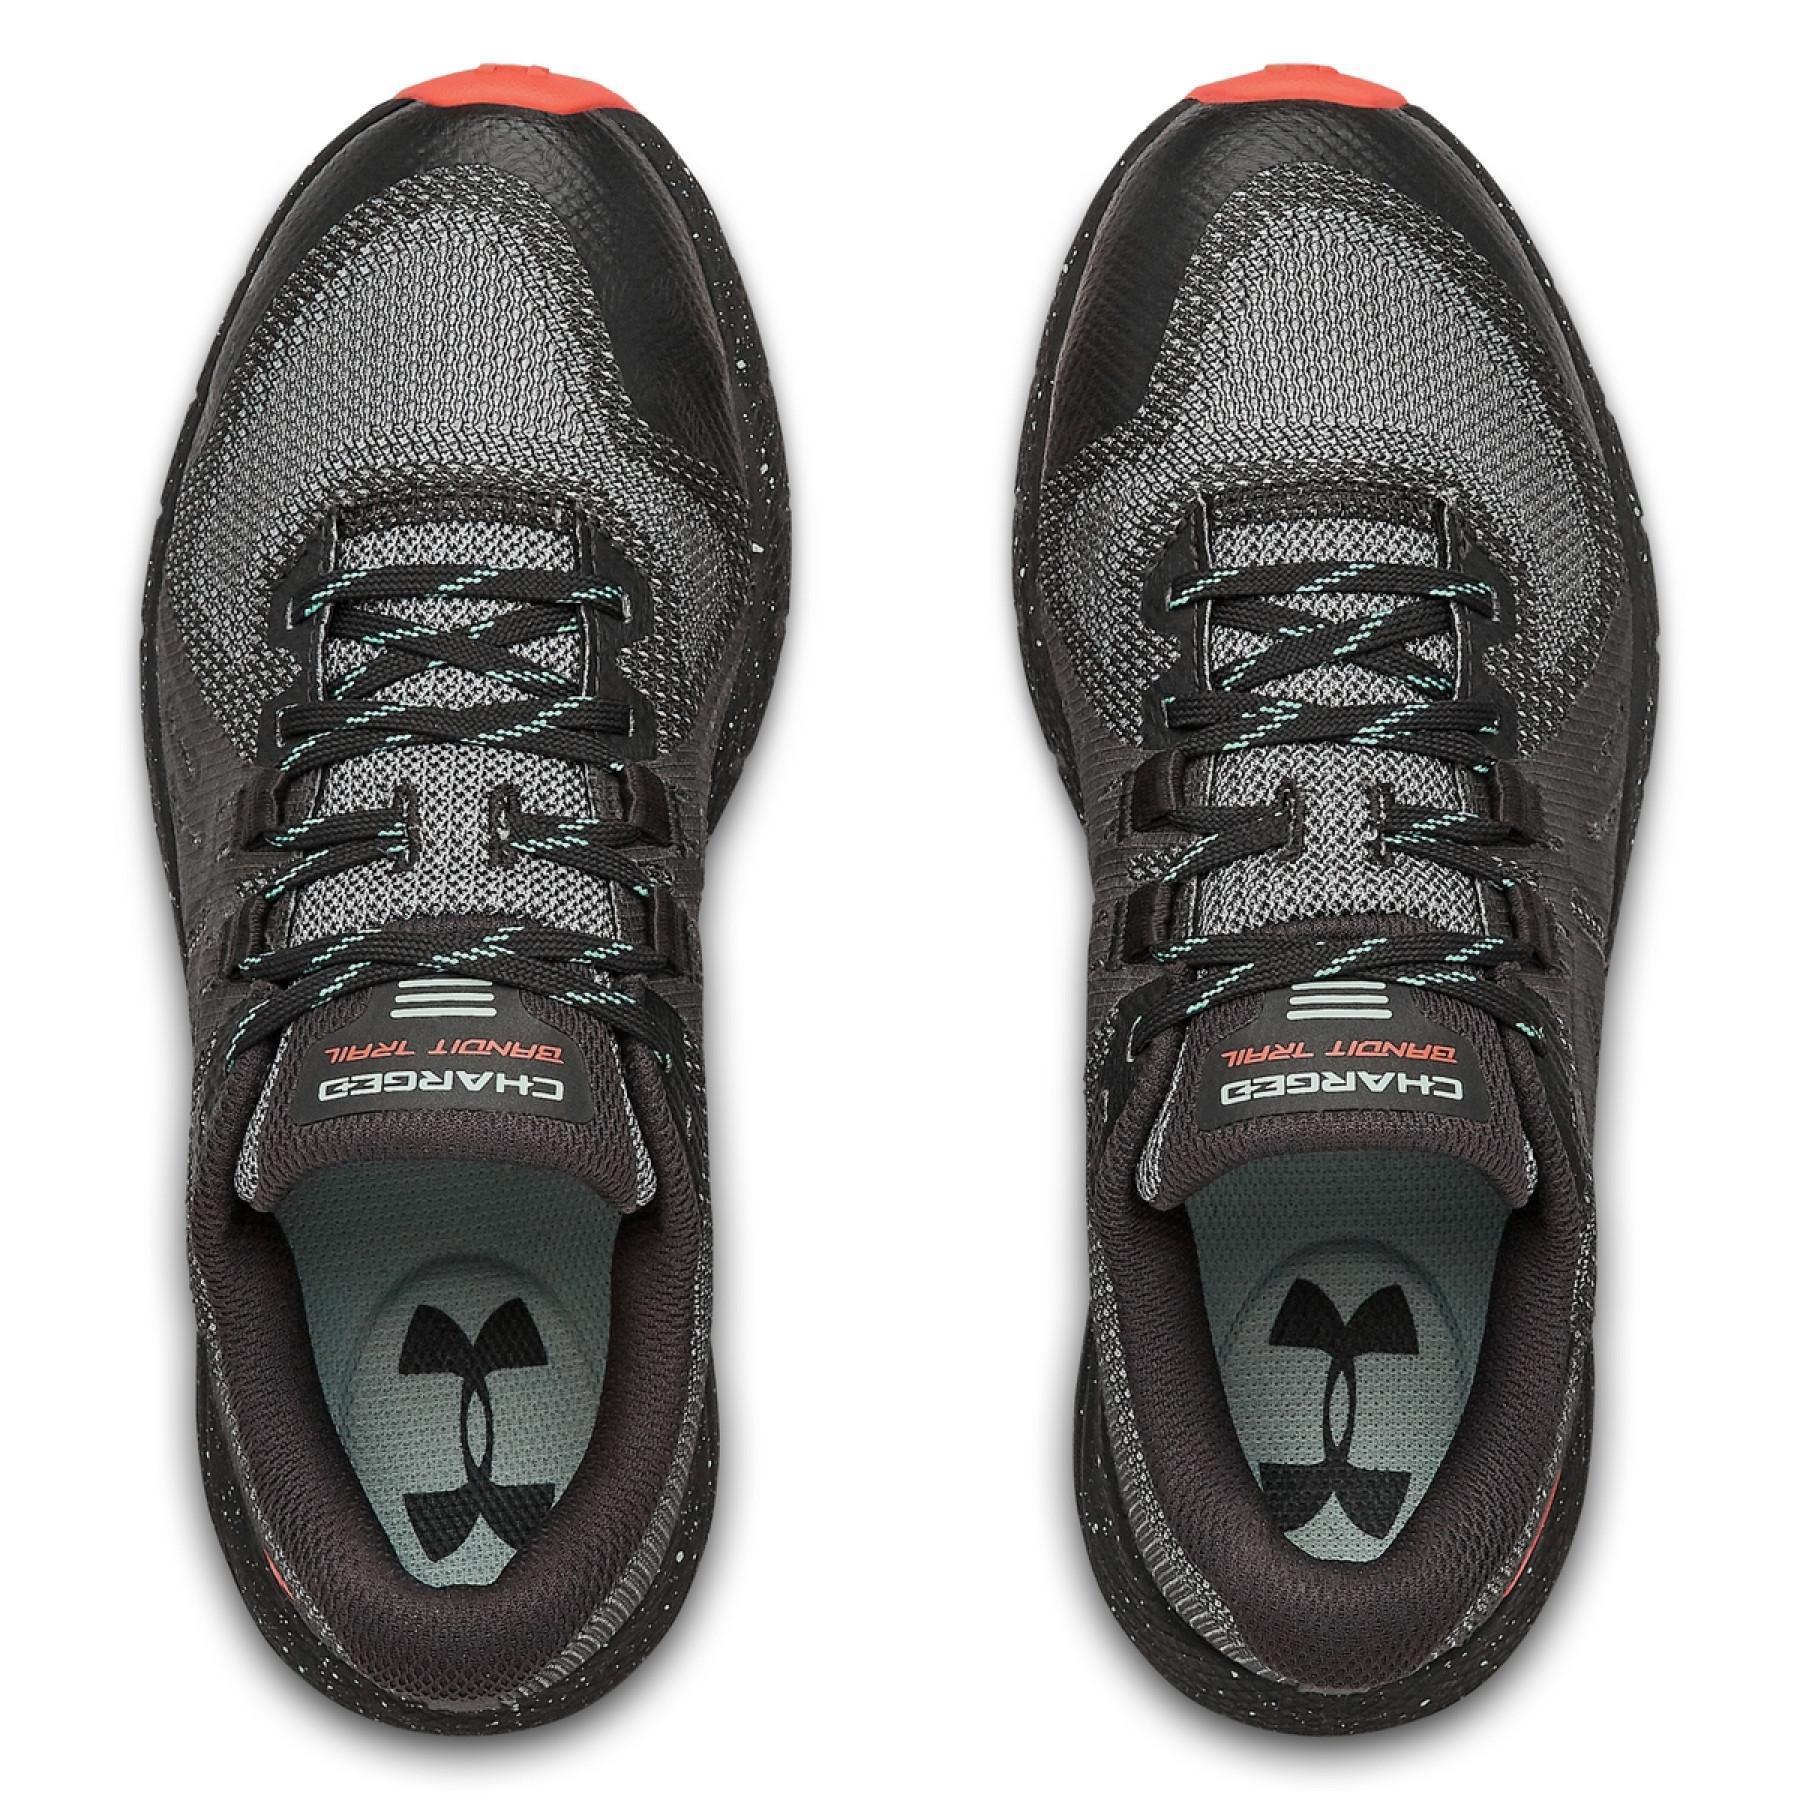 Women's running shoes Under Armour Charged Bandit Trail Gore-Tex